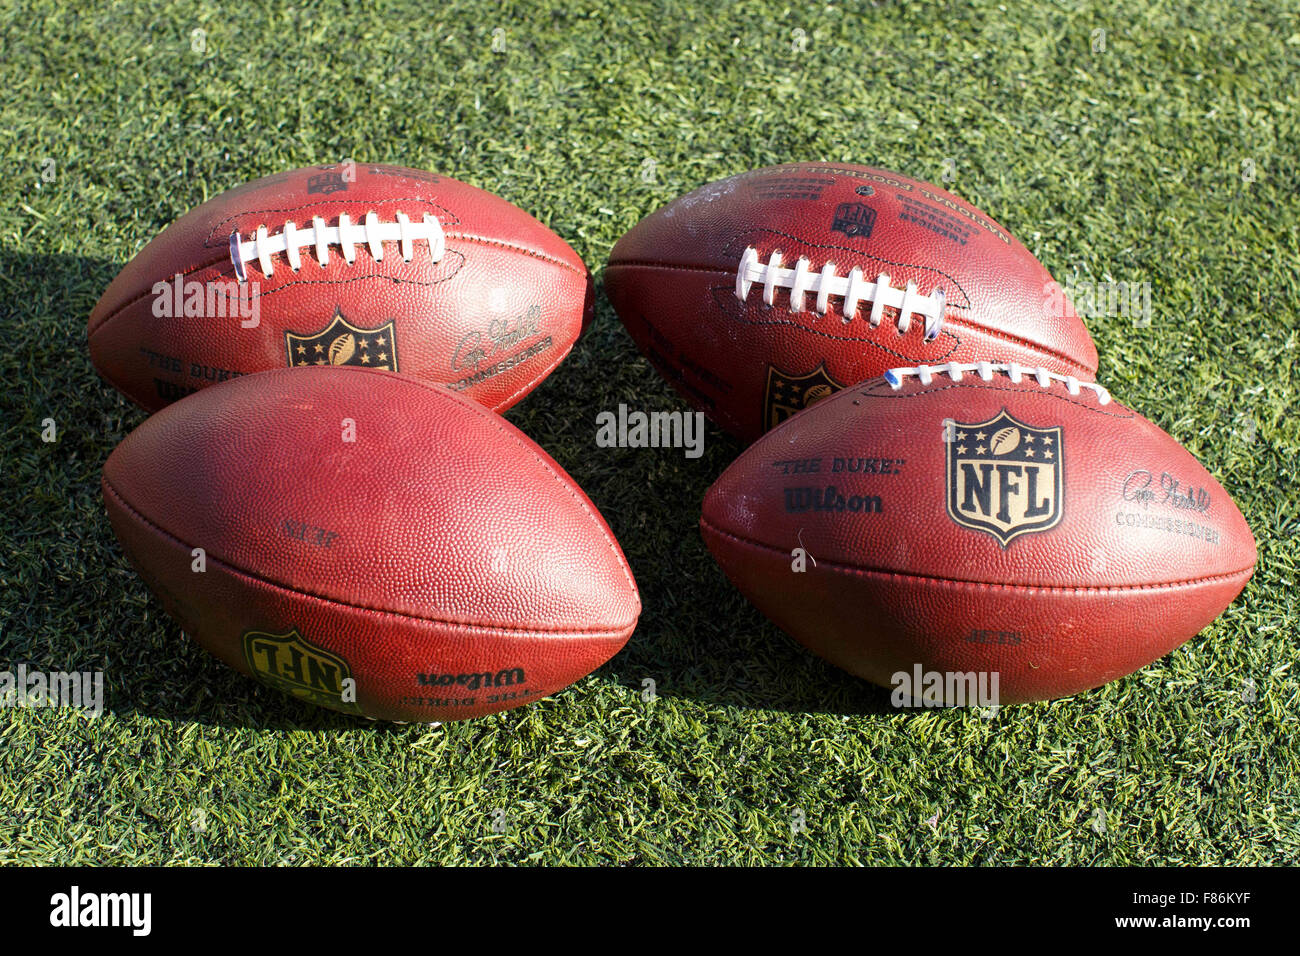 East Rutherford, New Jersey, USA. 6th Dec, 2015. Four NFL footballs sit